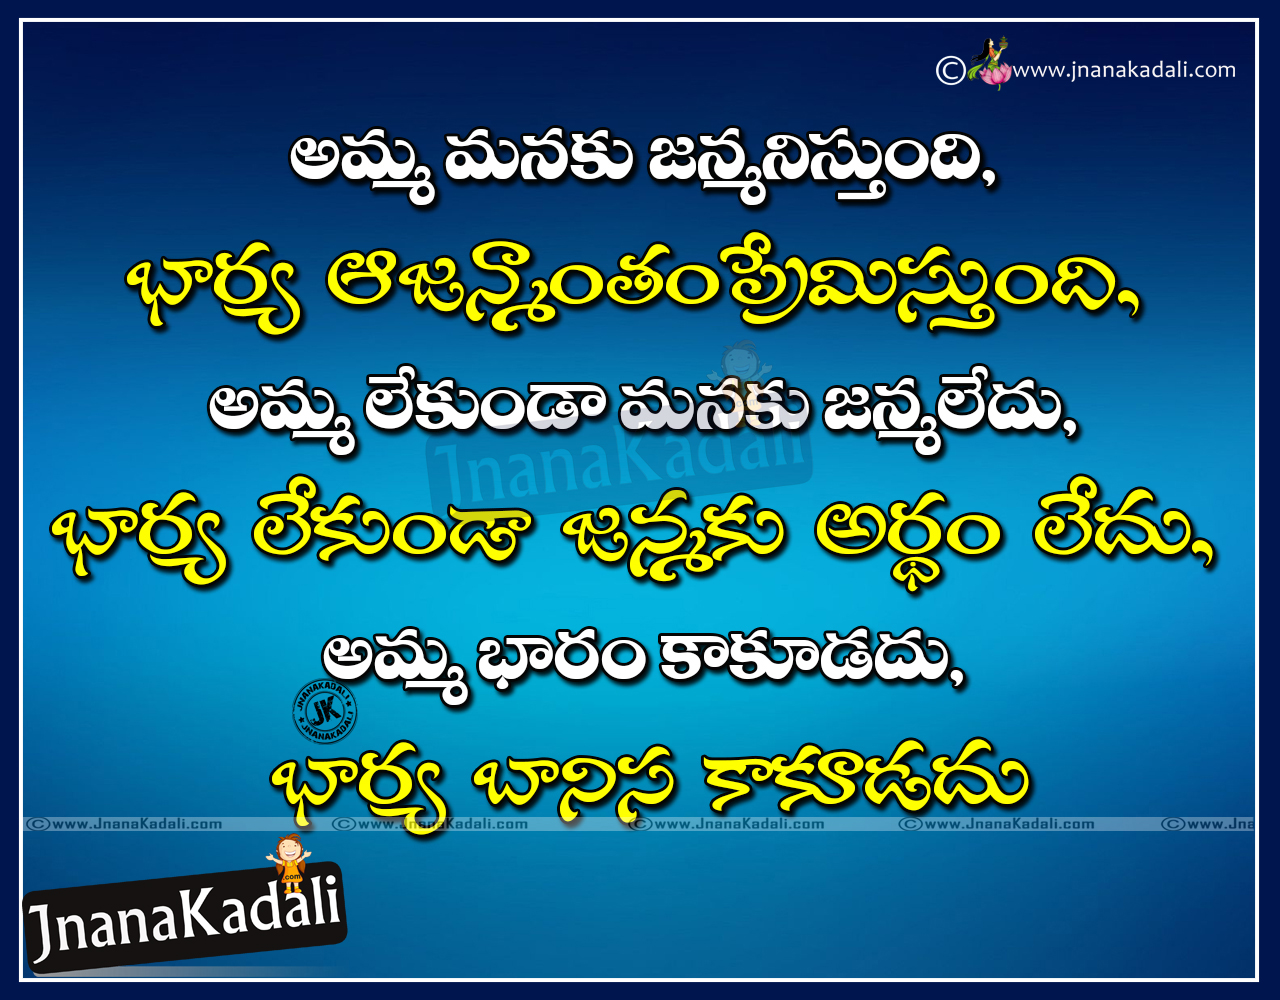 Here is a Good Wife Quotes in Telugu Language Famous Telugu Quotations about Wife Marriage Quotes in Telugu Language Telugu After Marriage Love Quotes in